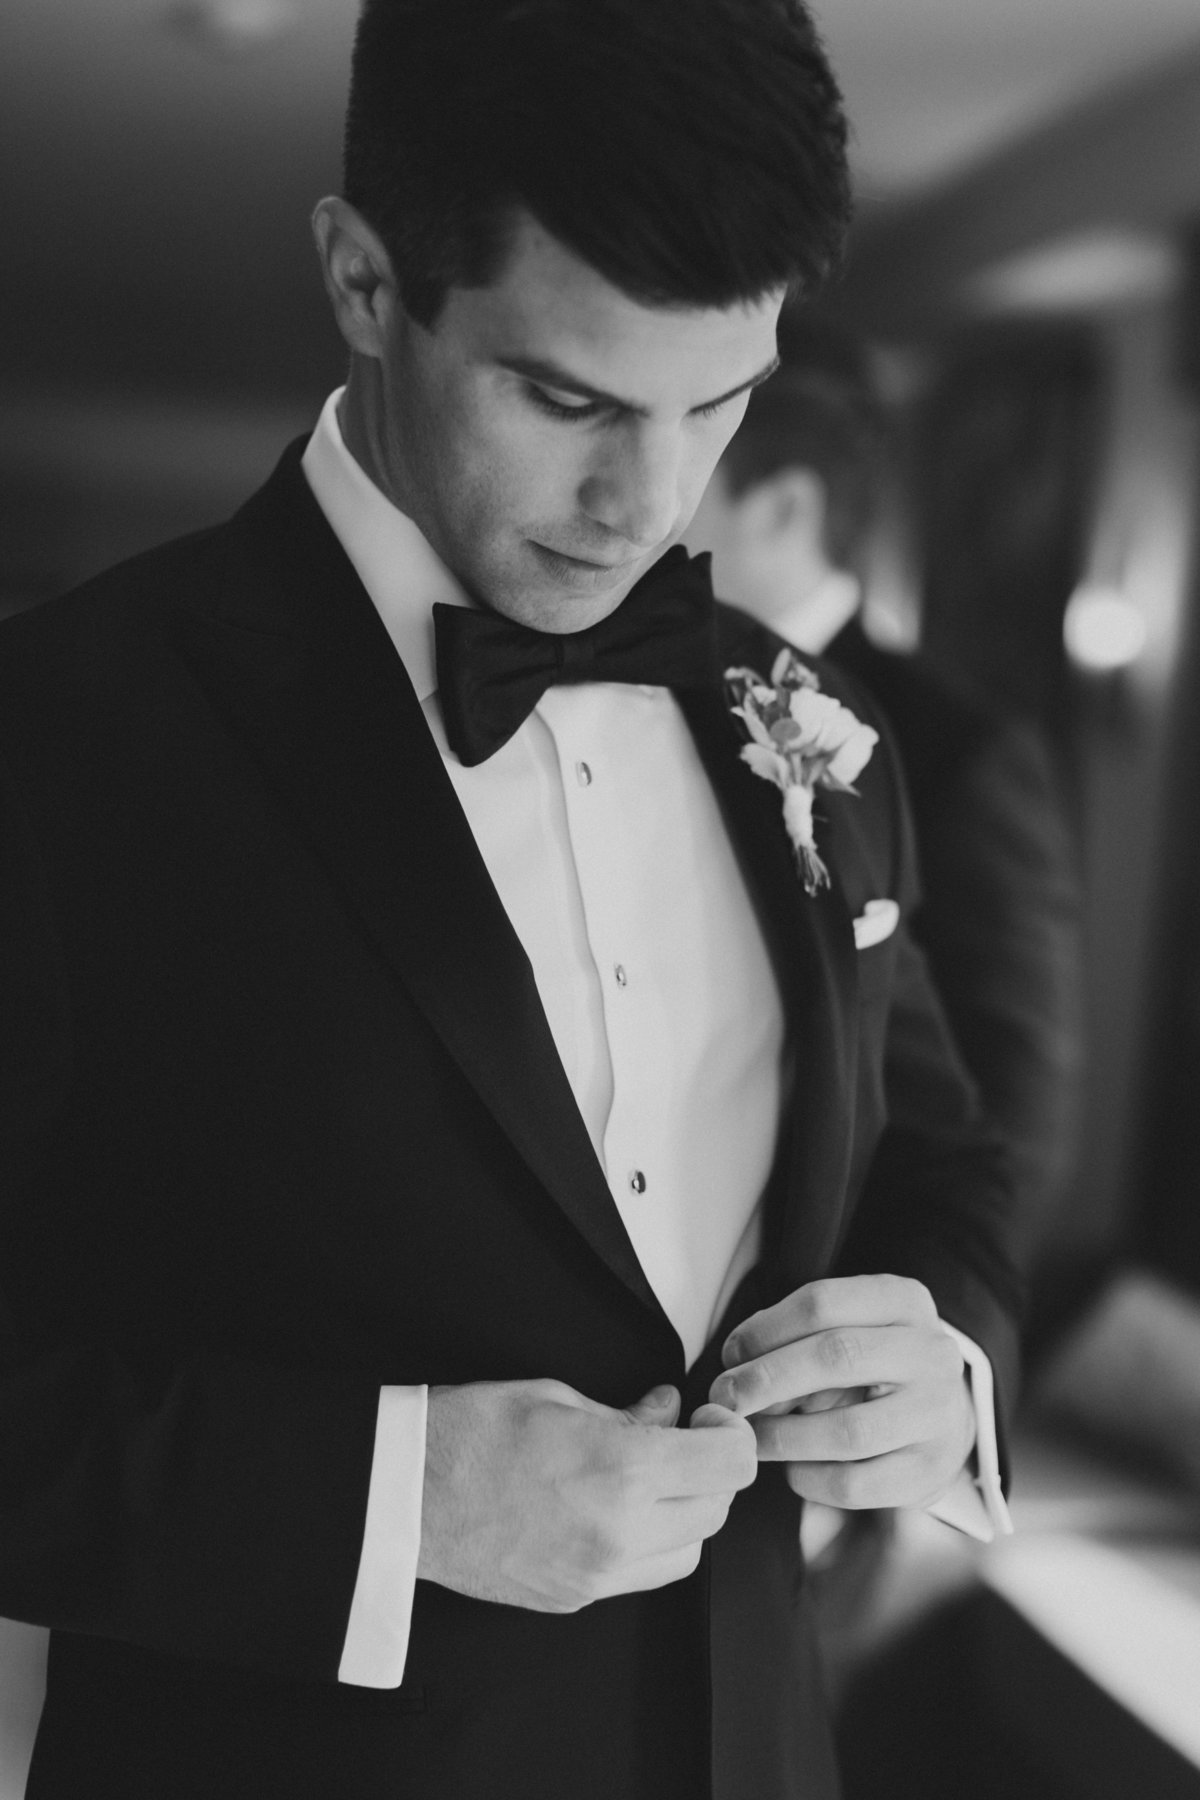 groom buttoning buttons on tuxedo on wedding day